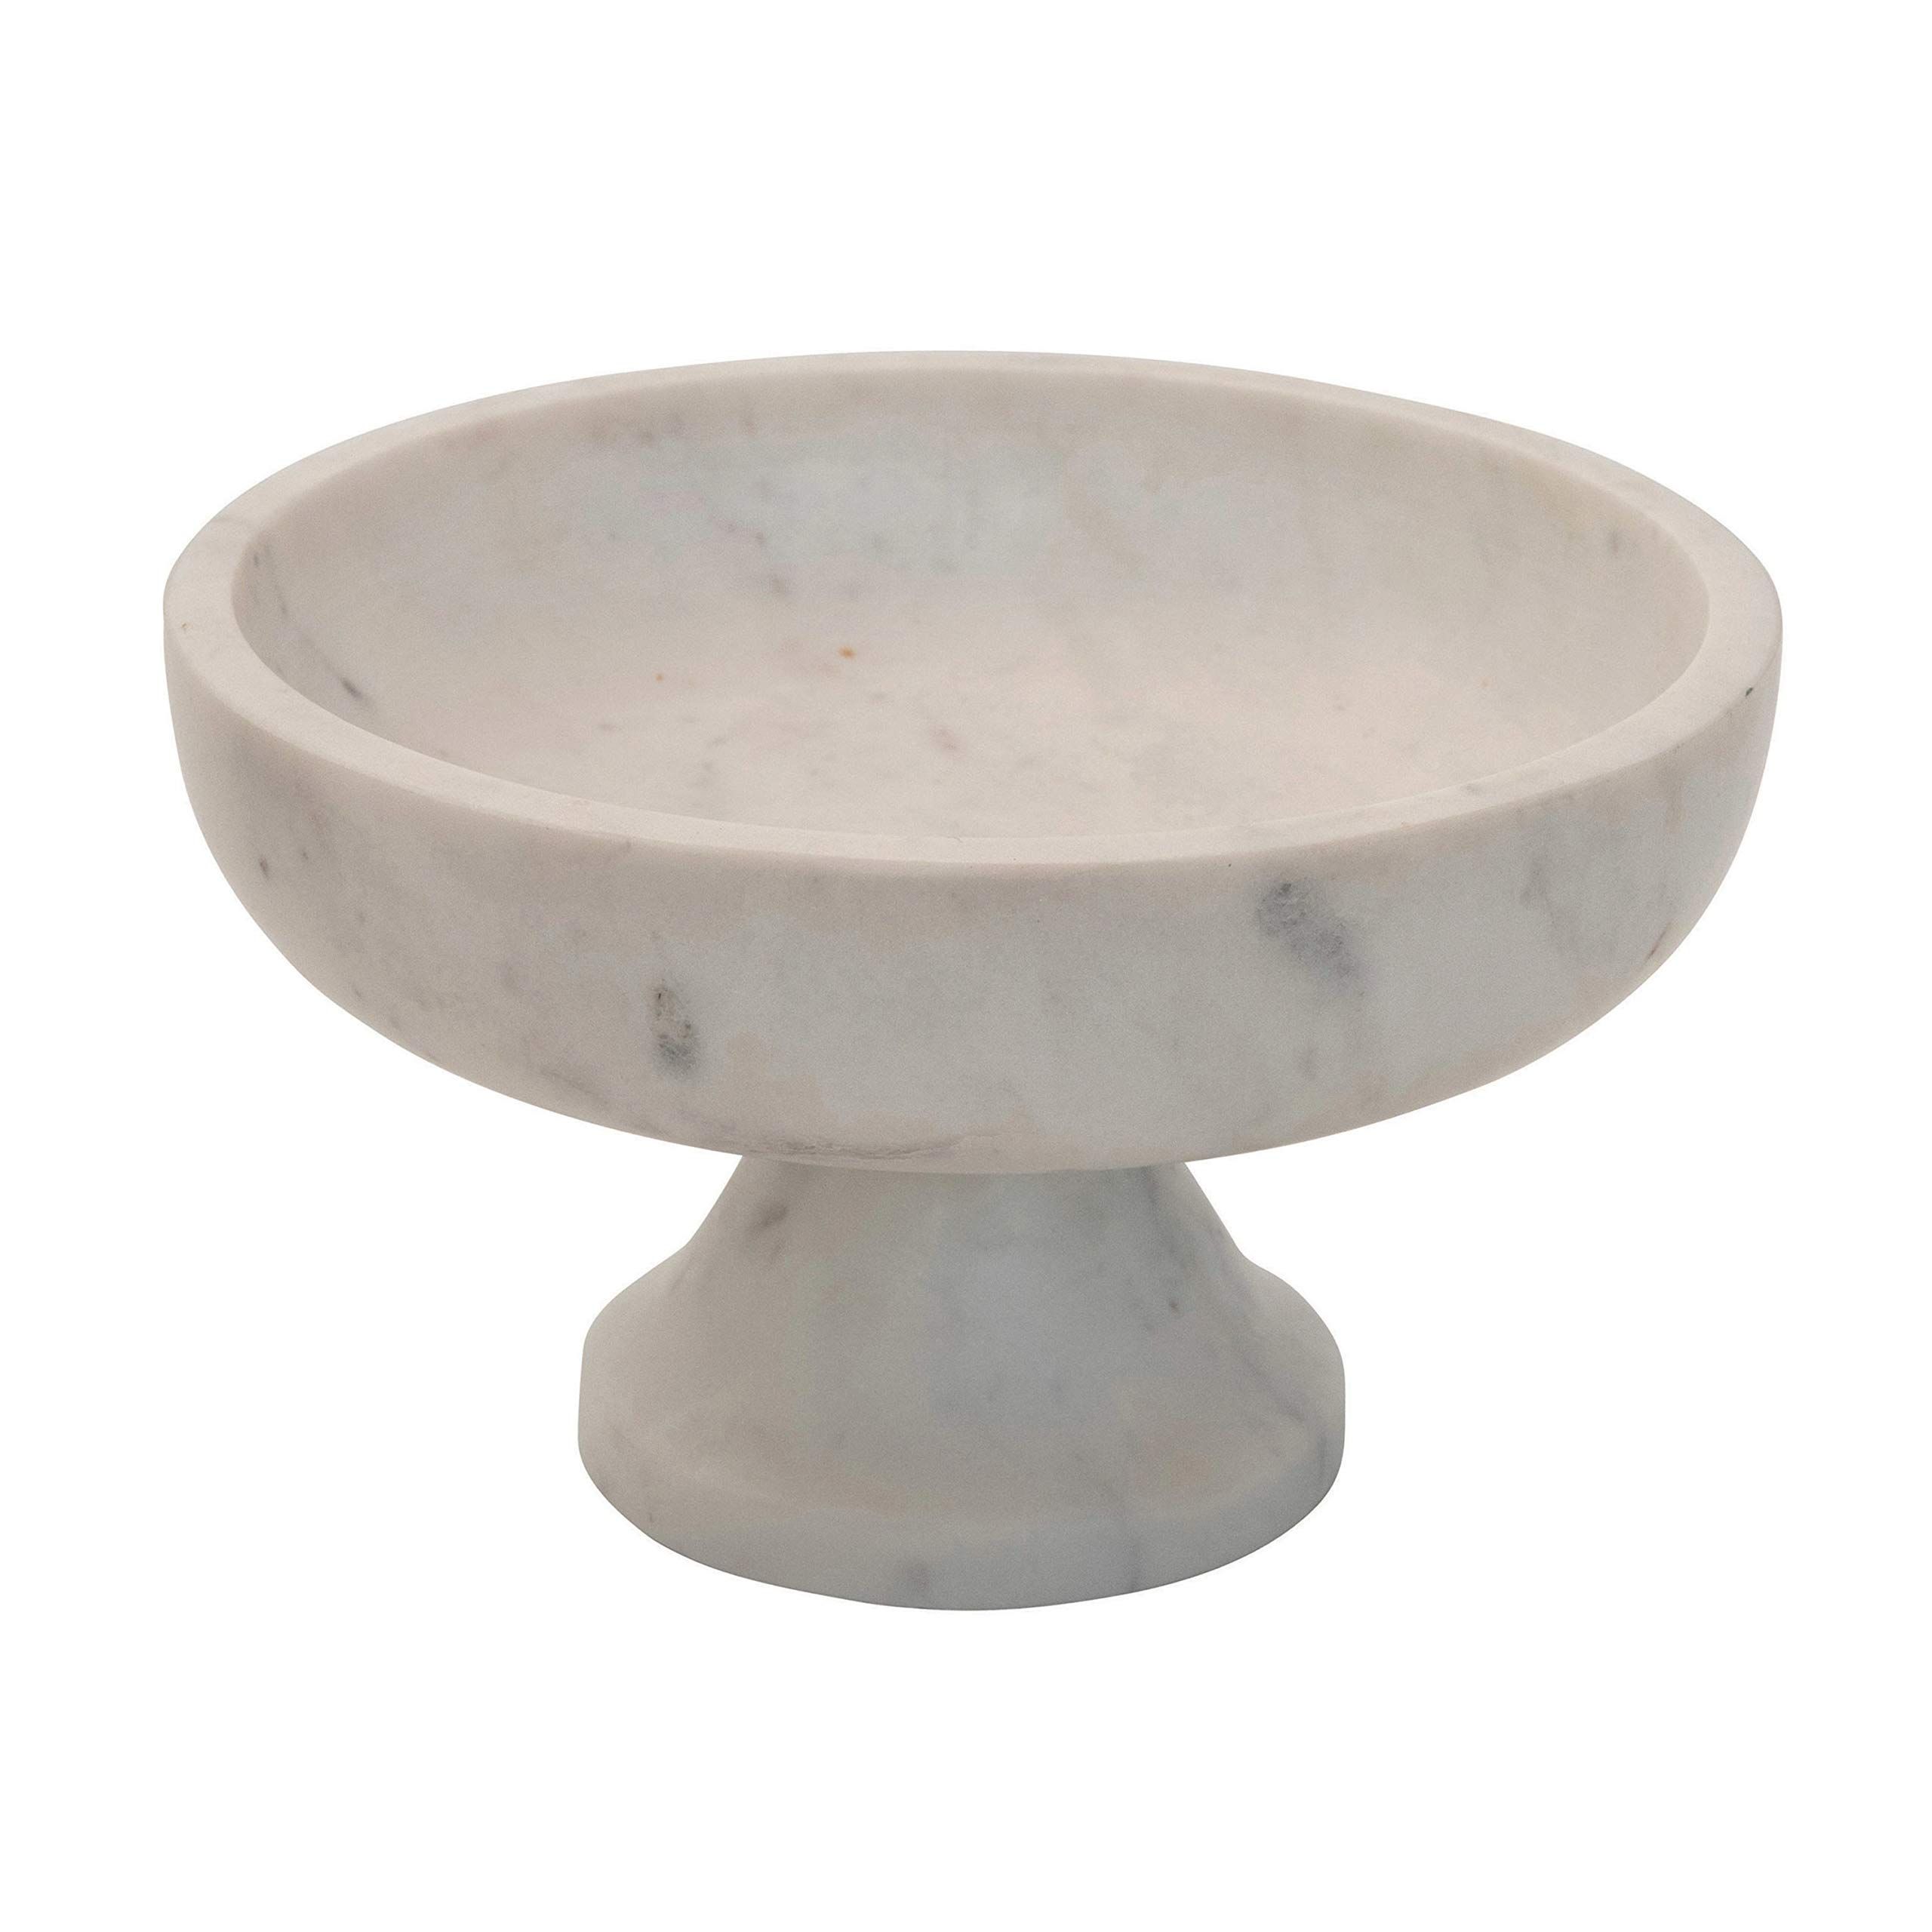 Bloomingville Marble Footed, White Bowl | Amazon (US)